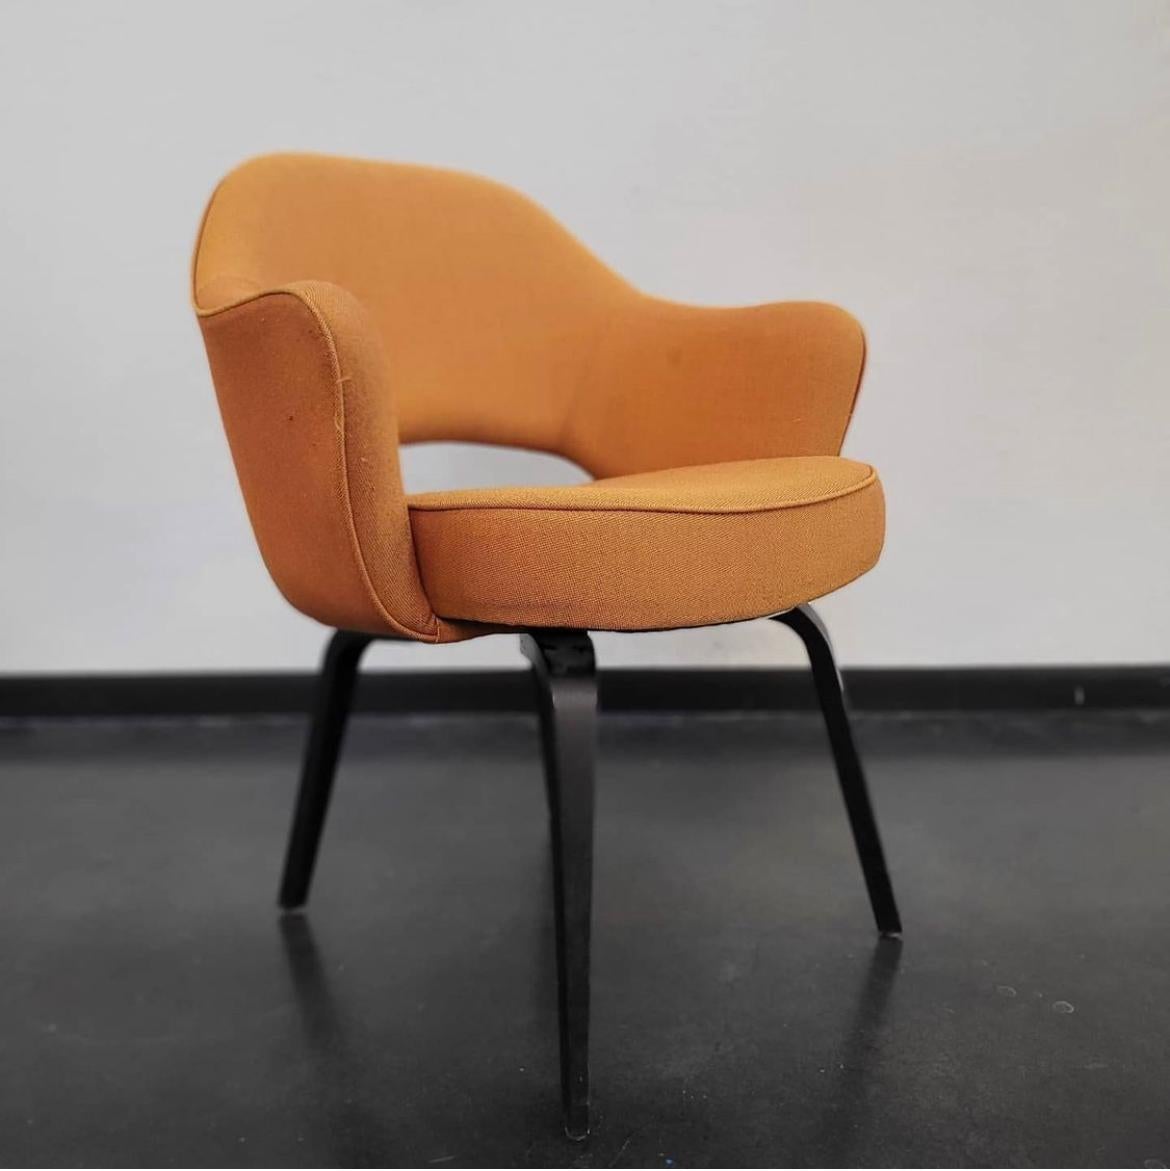 A pair of orange upholstered Eero Saarinen for Knoll executive chairs.